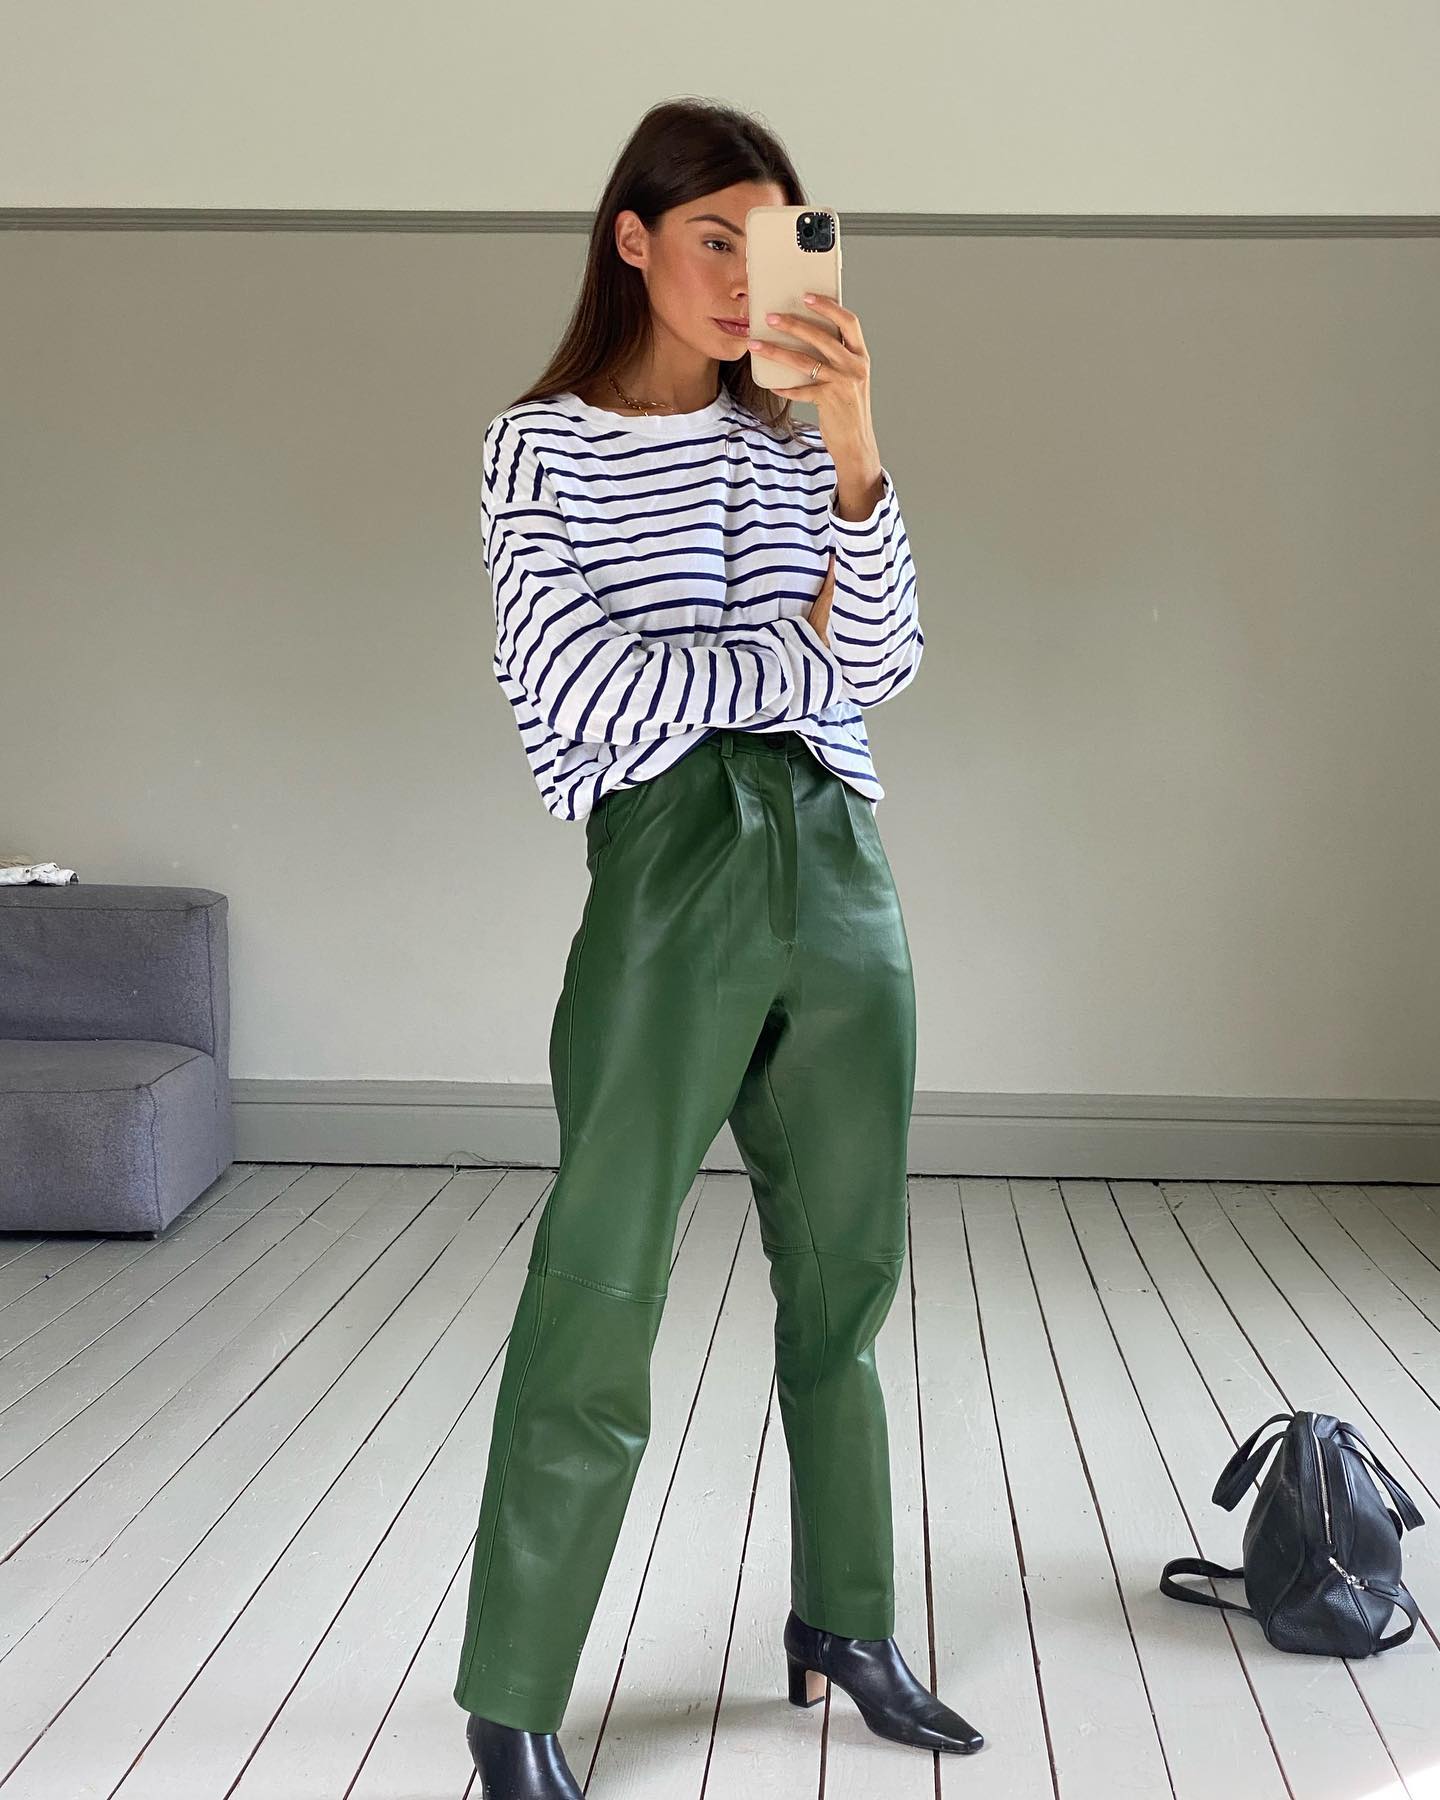 Marianne wearing green leather trousers